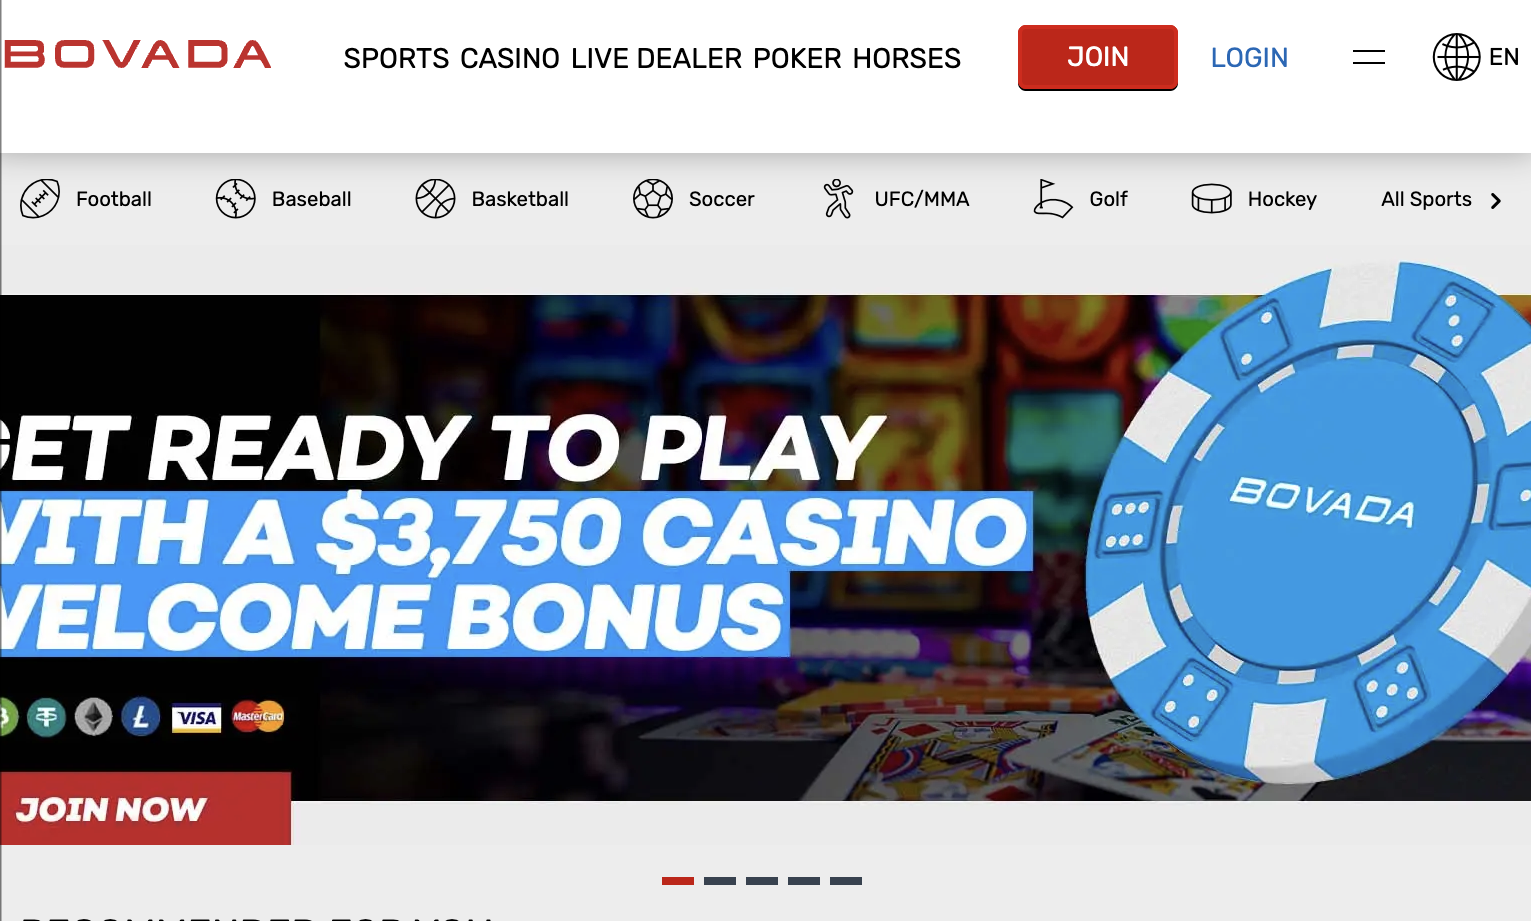 Bovada - The Best Offshore Casino for Poker Games